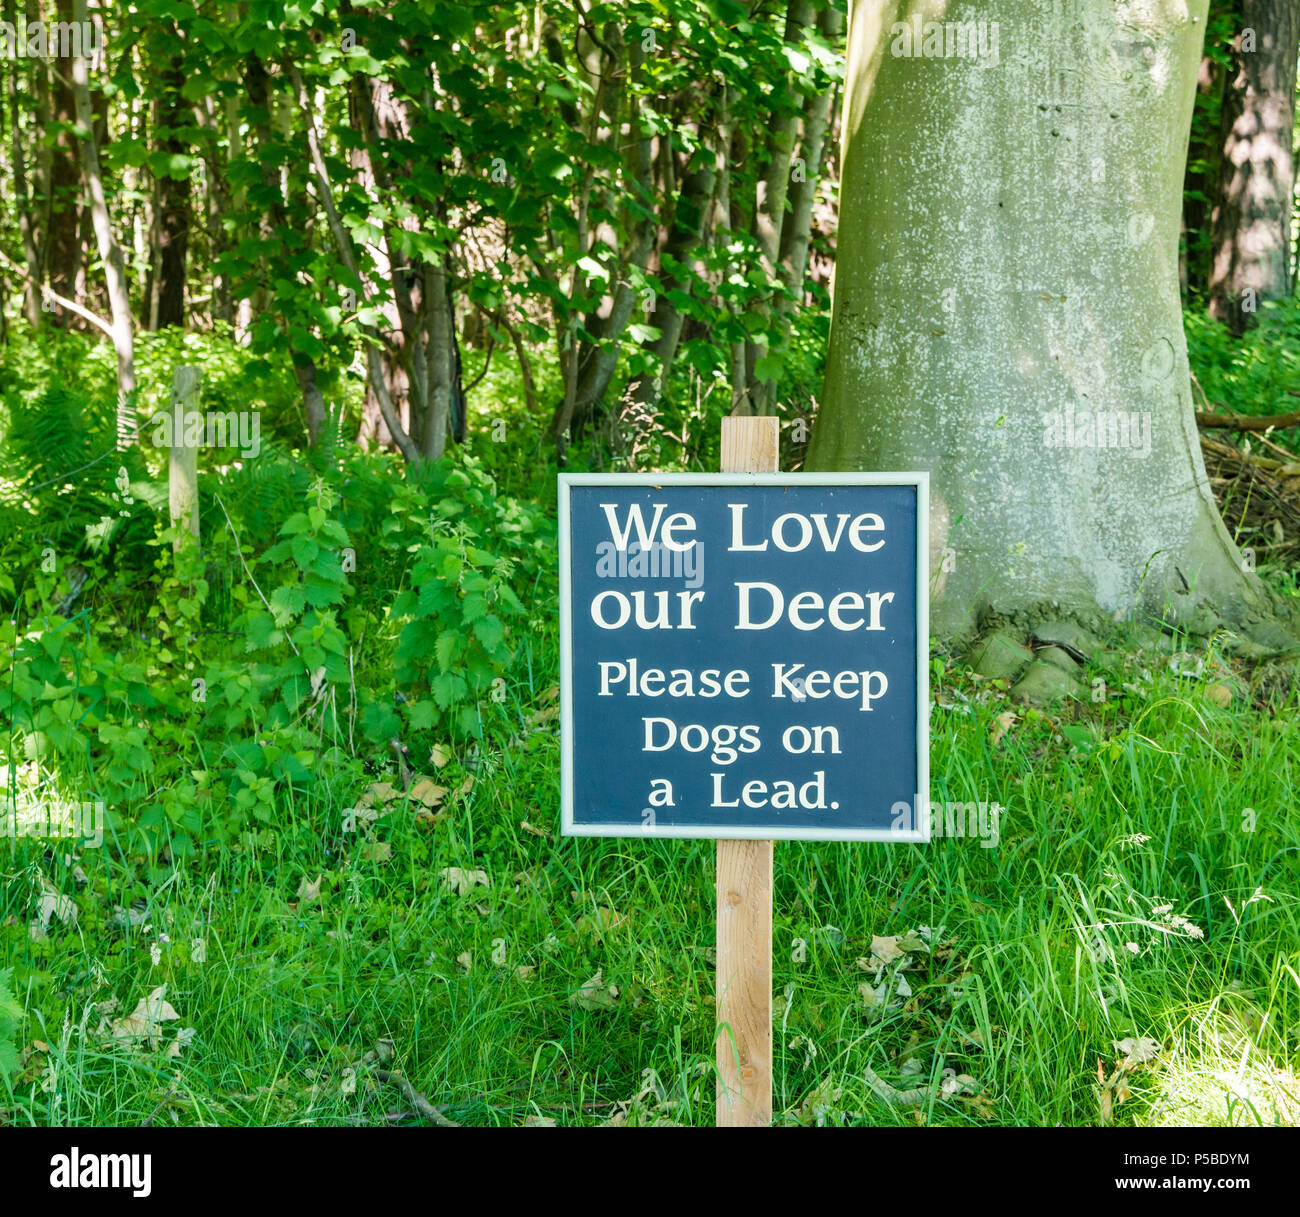 Notice sign in estate warning to keep dogs on a lead for deer protection, East Lothian, Scotland, UK Stock Photo